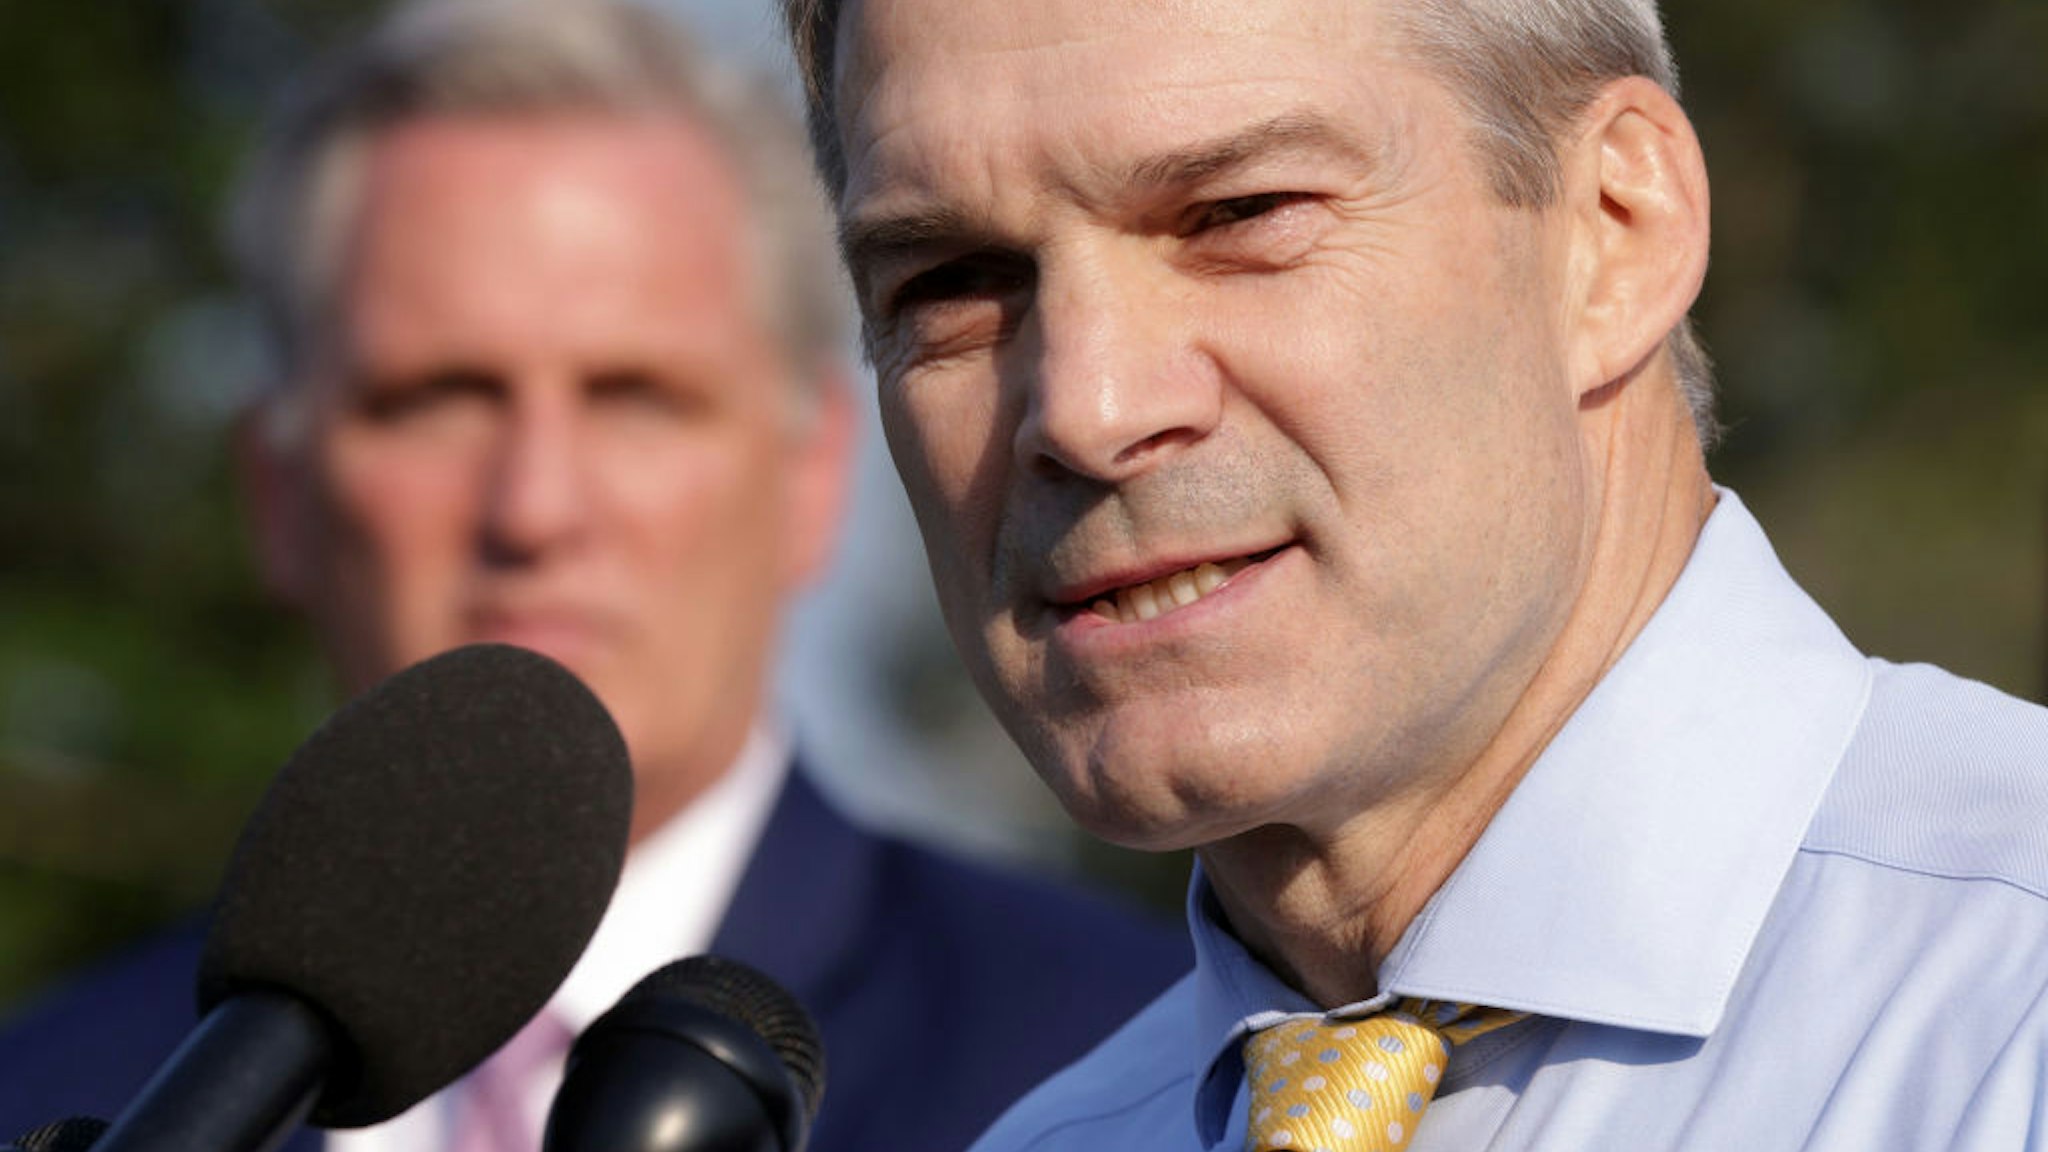 U.S. Jim Jordan (R-OH) (R) speaks as House Minority Leader Rep. Kevin McCarthy (R-CA) listens during a news conference in front of the U.S. Capitol on July 27, 2021 in Washington, DC.